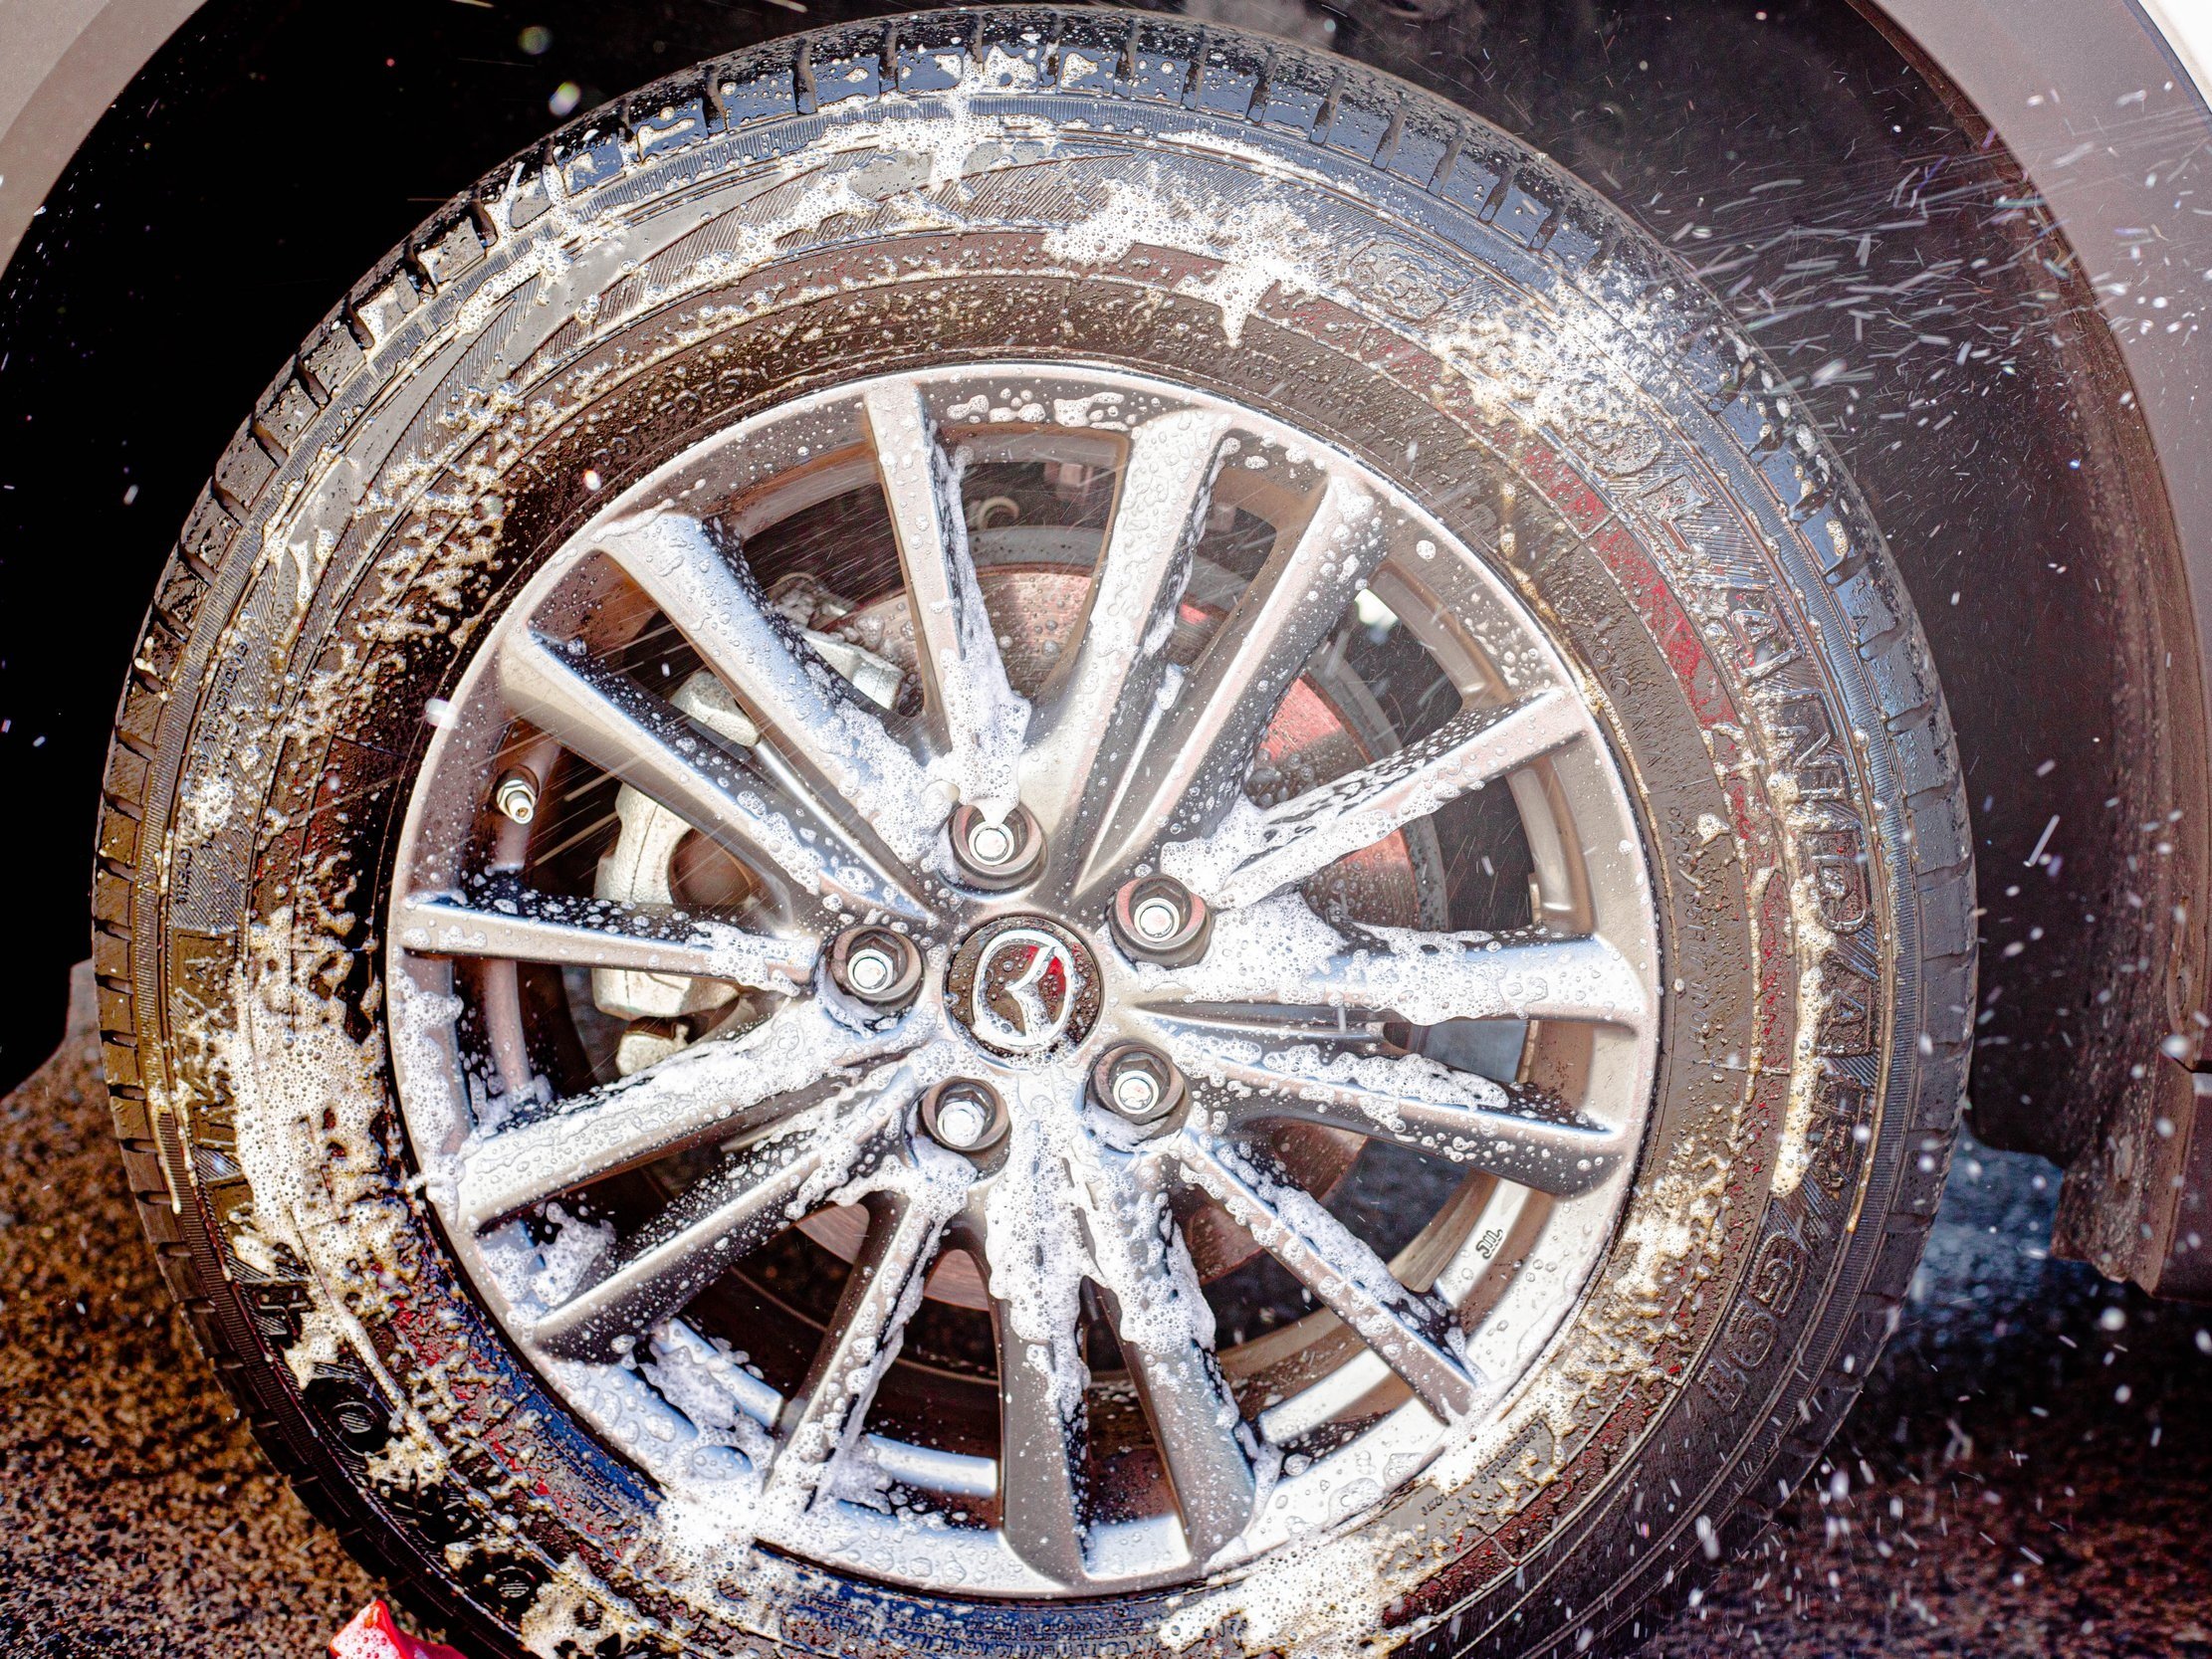 How to clean wheels and tires